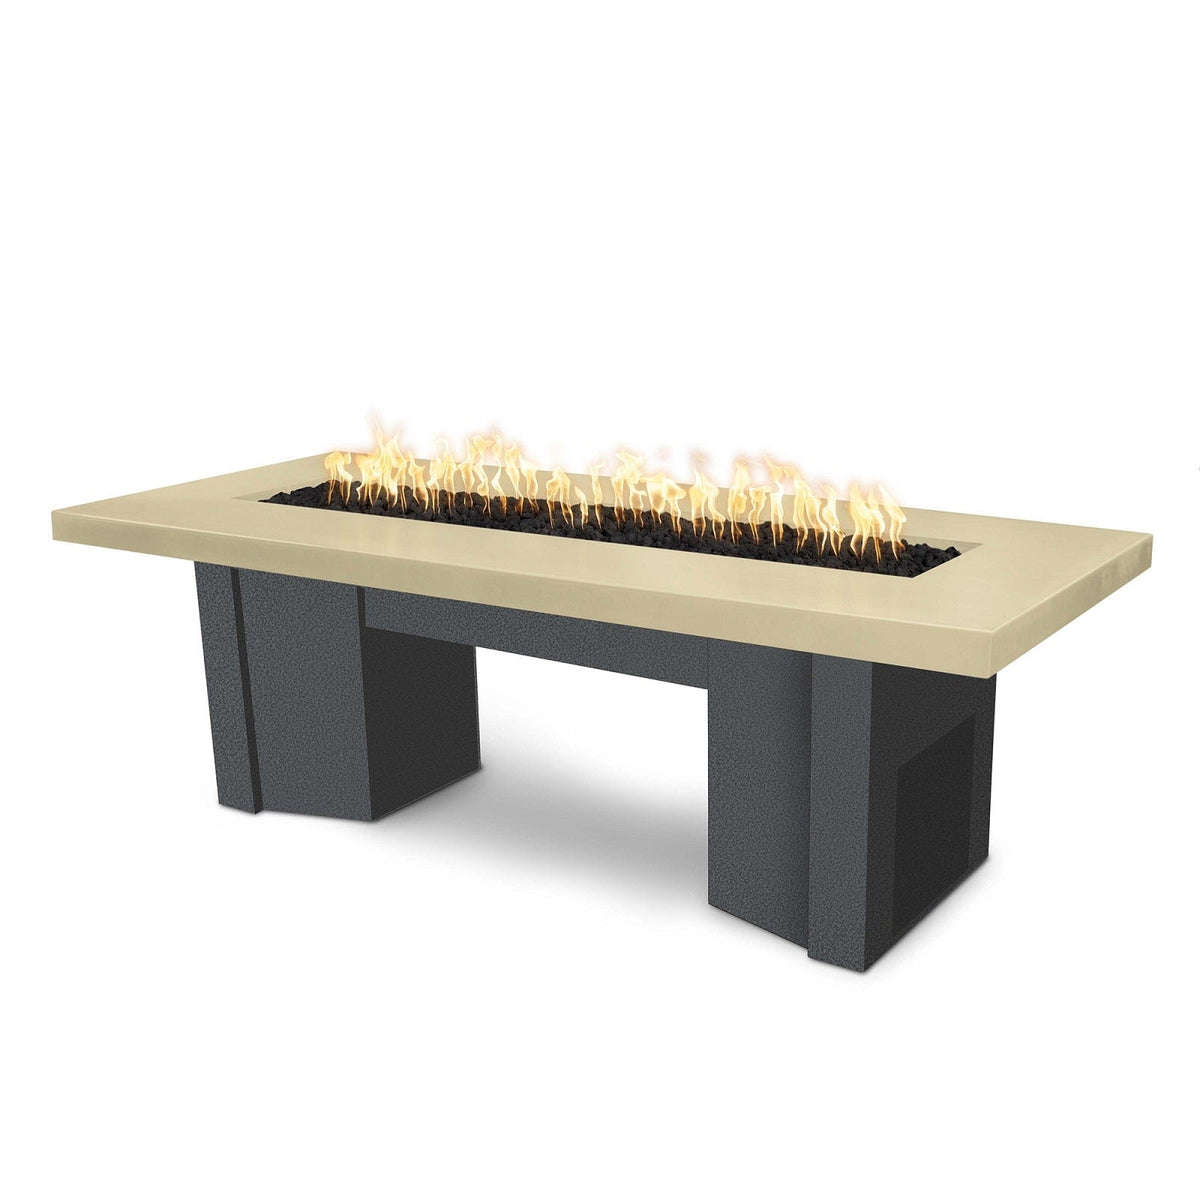 The Outdoor Plus Fire Features Vanilla (-VAN) / Silver Vein Powder Coated Steel (-SLV) The Outdoor Plus 60&quot; Alameda Fire Table Smooth Concrete in Liquid Propane - Flame Sense System with Push Button Spark Igniter / OPT-ALMGFRC60FSEN-LP